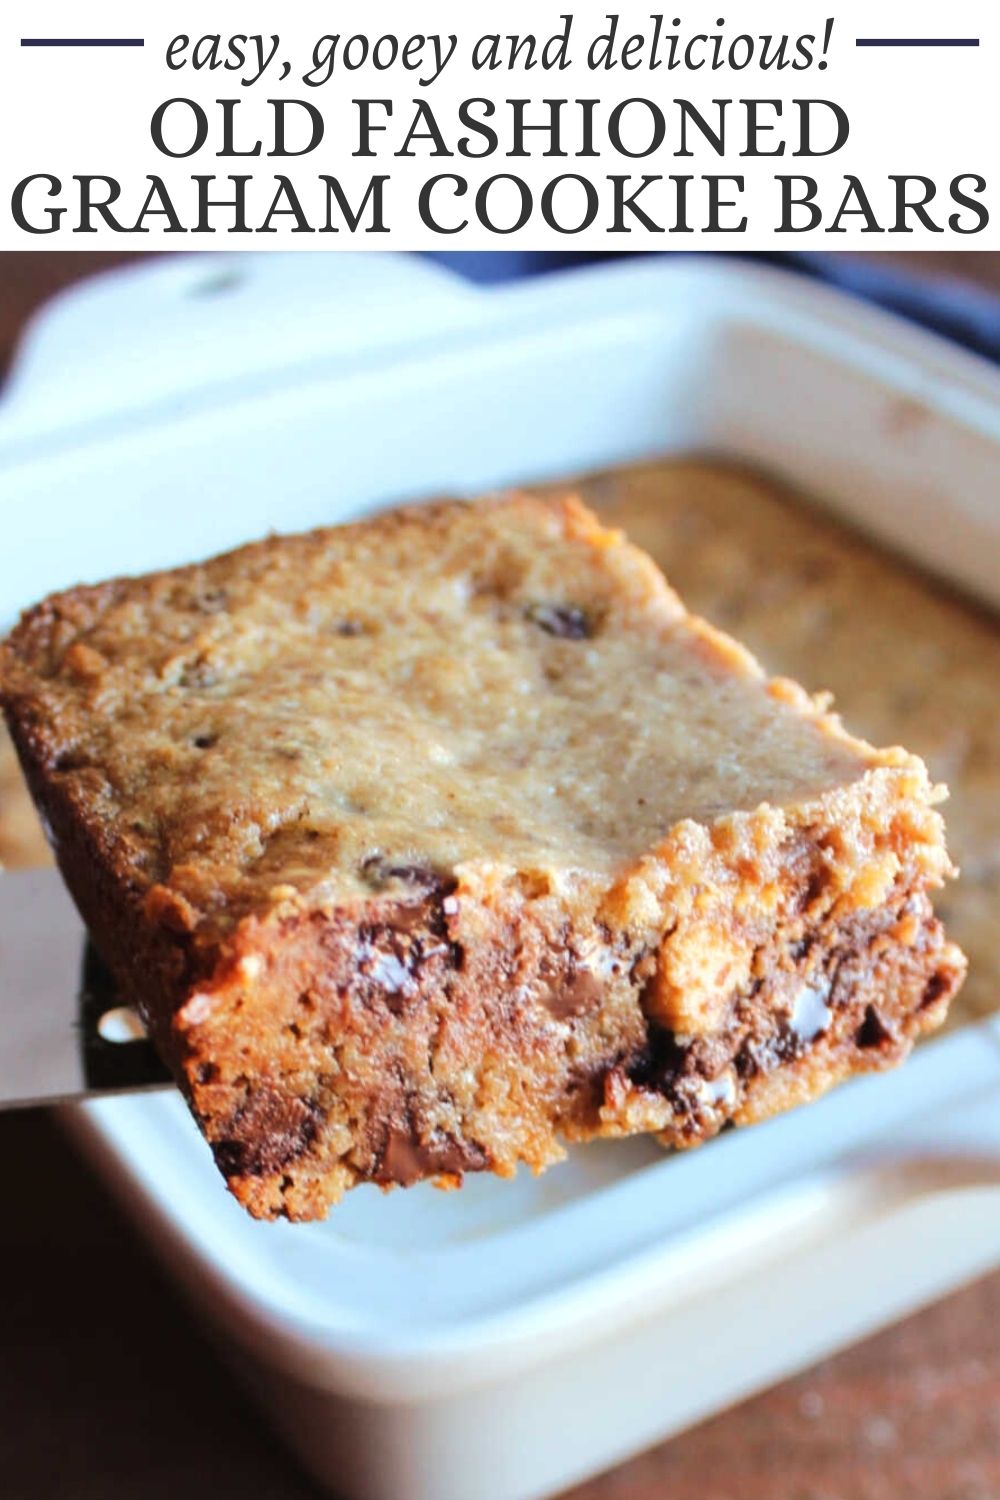 This is a photo of a Graham Cookie Bar on a small spatula, being served from a white square baking pan baked with the bars.